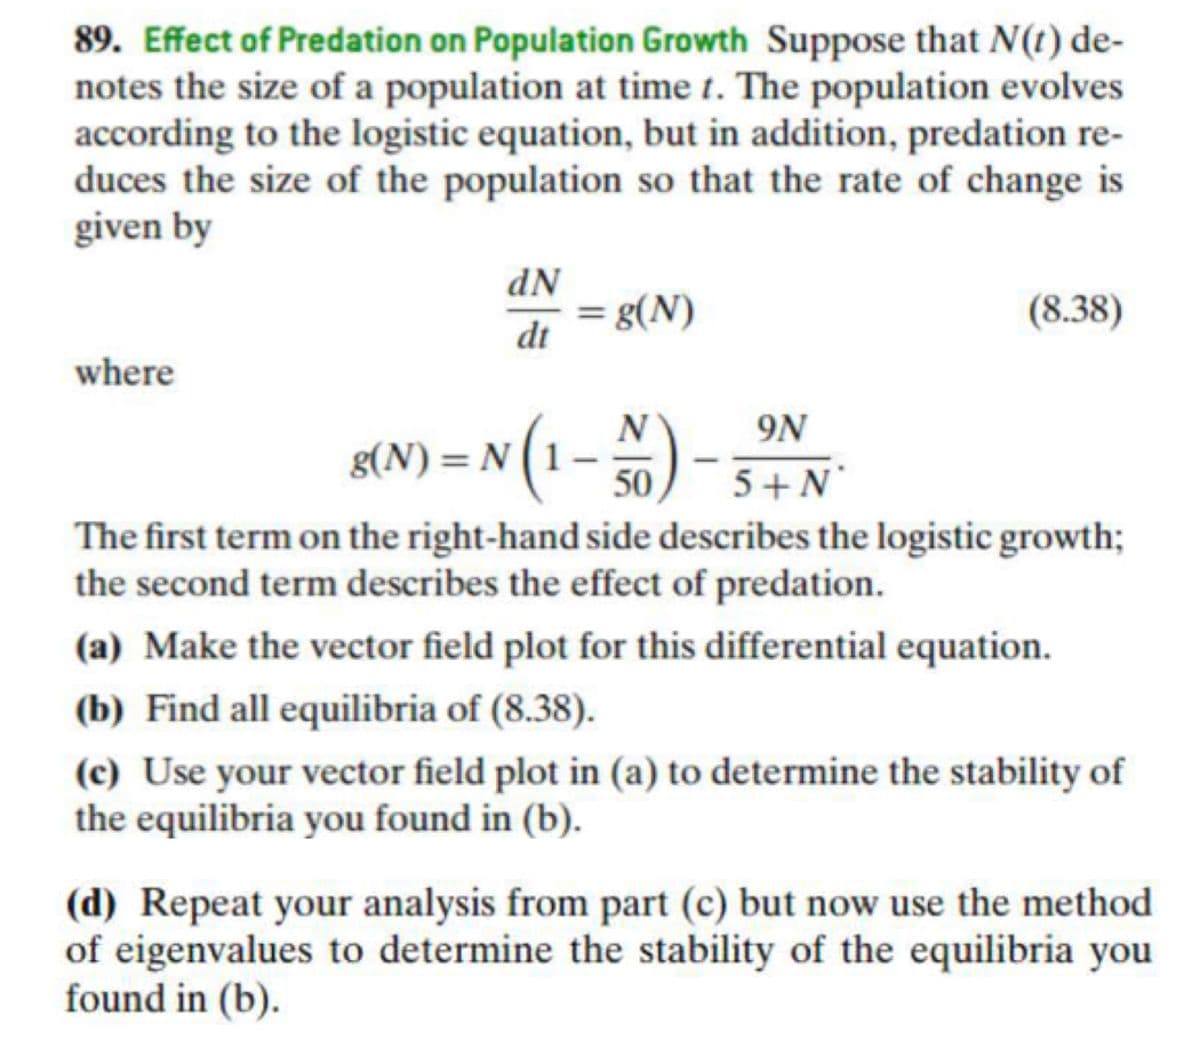 89. Effect of Predation on Population Growth Suppose that N(1) de-
notes the size of a population at time t. The population evolves
according to the logistic equation, but in addition, predation re-
duces the size of the population so that the rate of change is
given by
dN
(8.38)
di =8(N)
where
N(1-%)- 3+N
9N
50
5 + N°
The first term on the right-hand side describes the logistic growth;
the second term describes the effect of predation.
(a) Make the vector field plot for this differential equation.
(b) Find all equilibria of (8.38).
(c) Use your vector field plot in (a) to determine the stability of
the equilibria you found in (b).
(d) Repeat your analysis from part (c) but now use the method
of eigenvalues to determine the stability of the equilibria you
found in (b).
